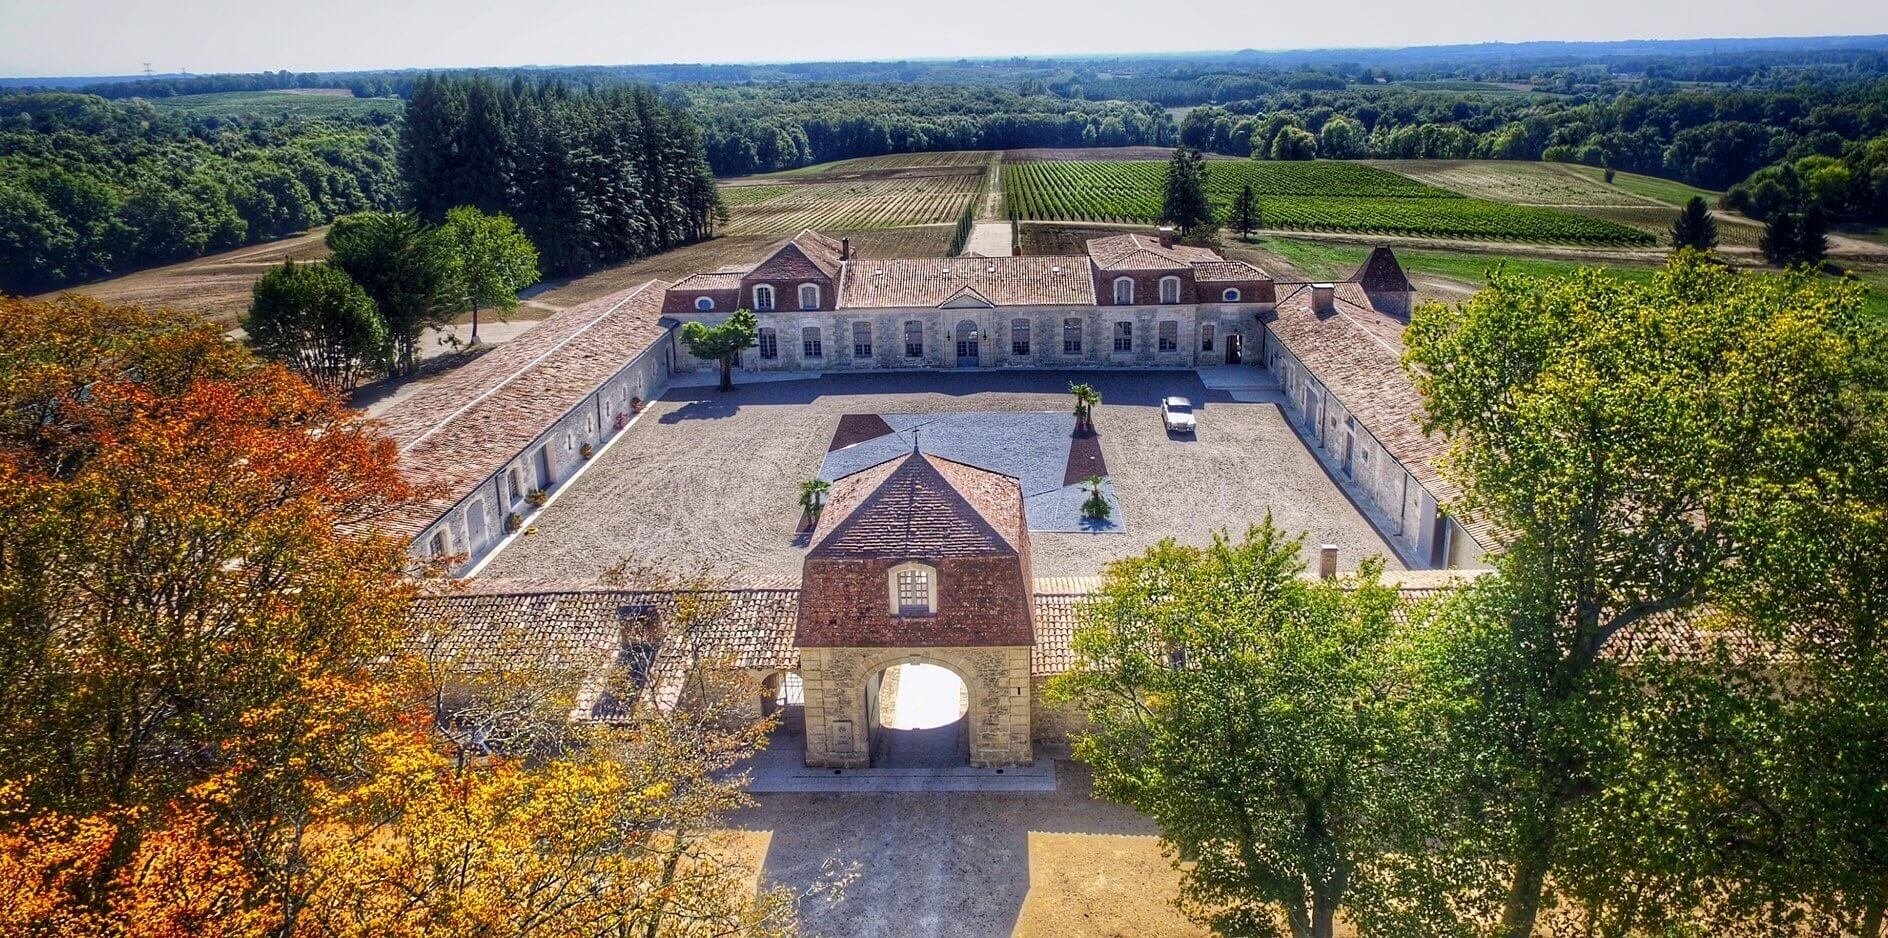 An exceptional château to organize an exceptional seminar with your colleagues